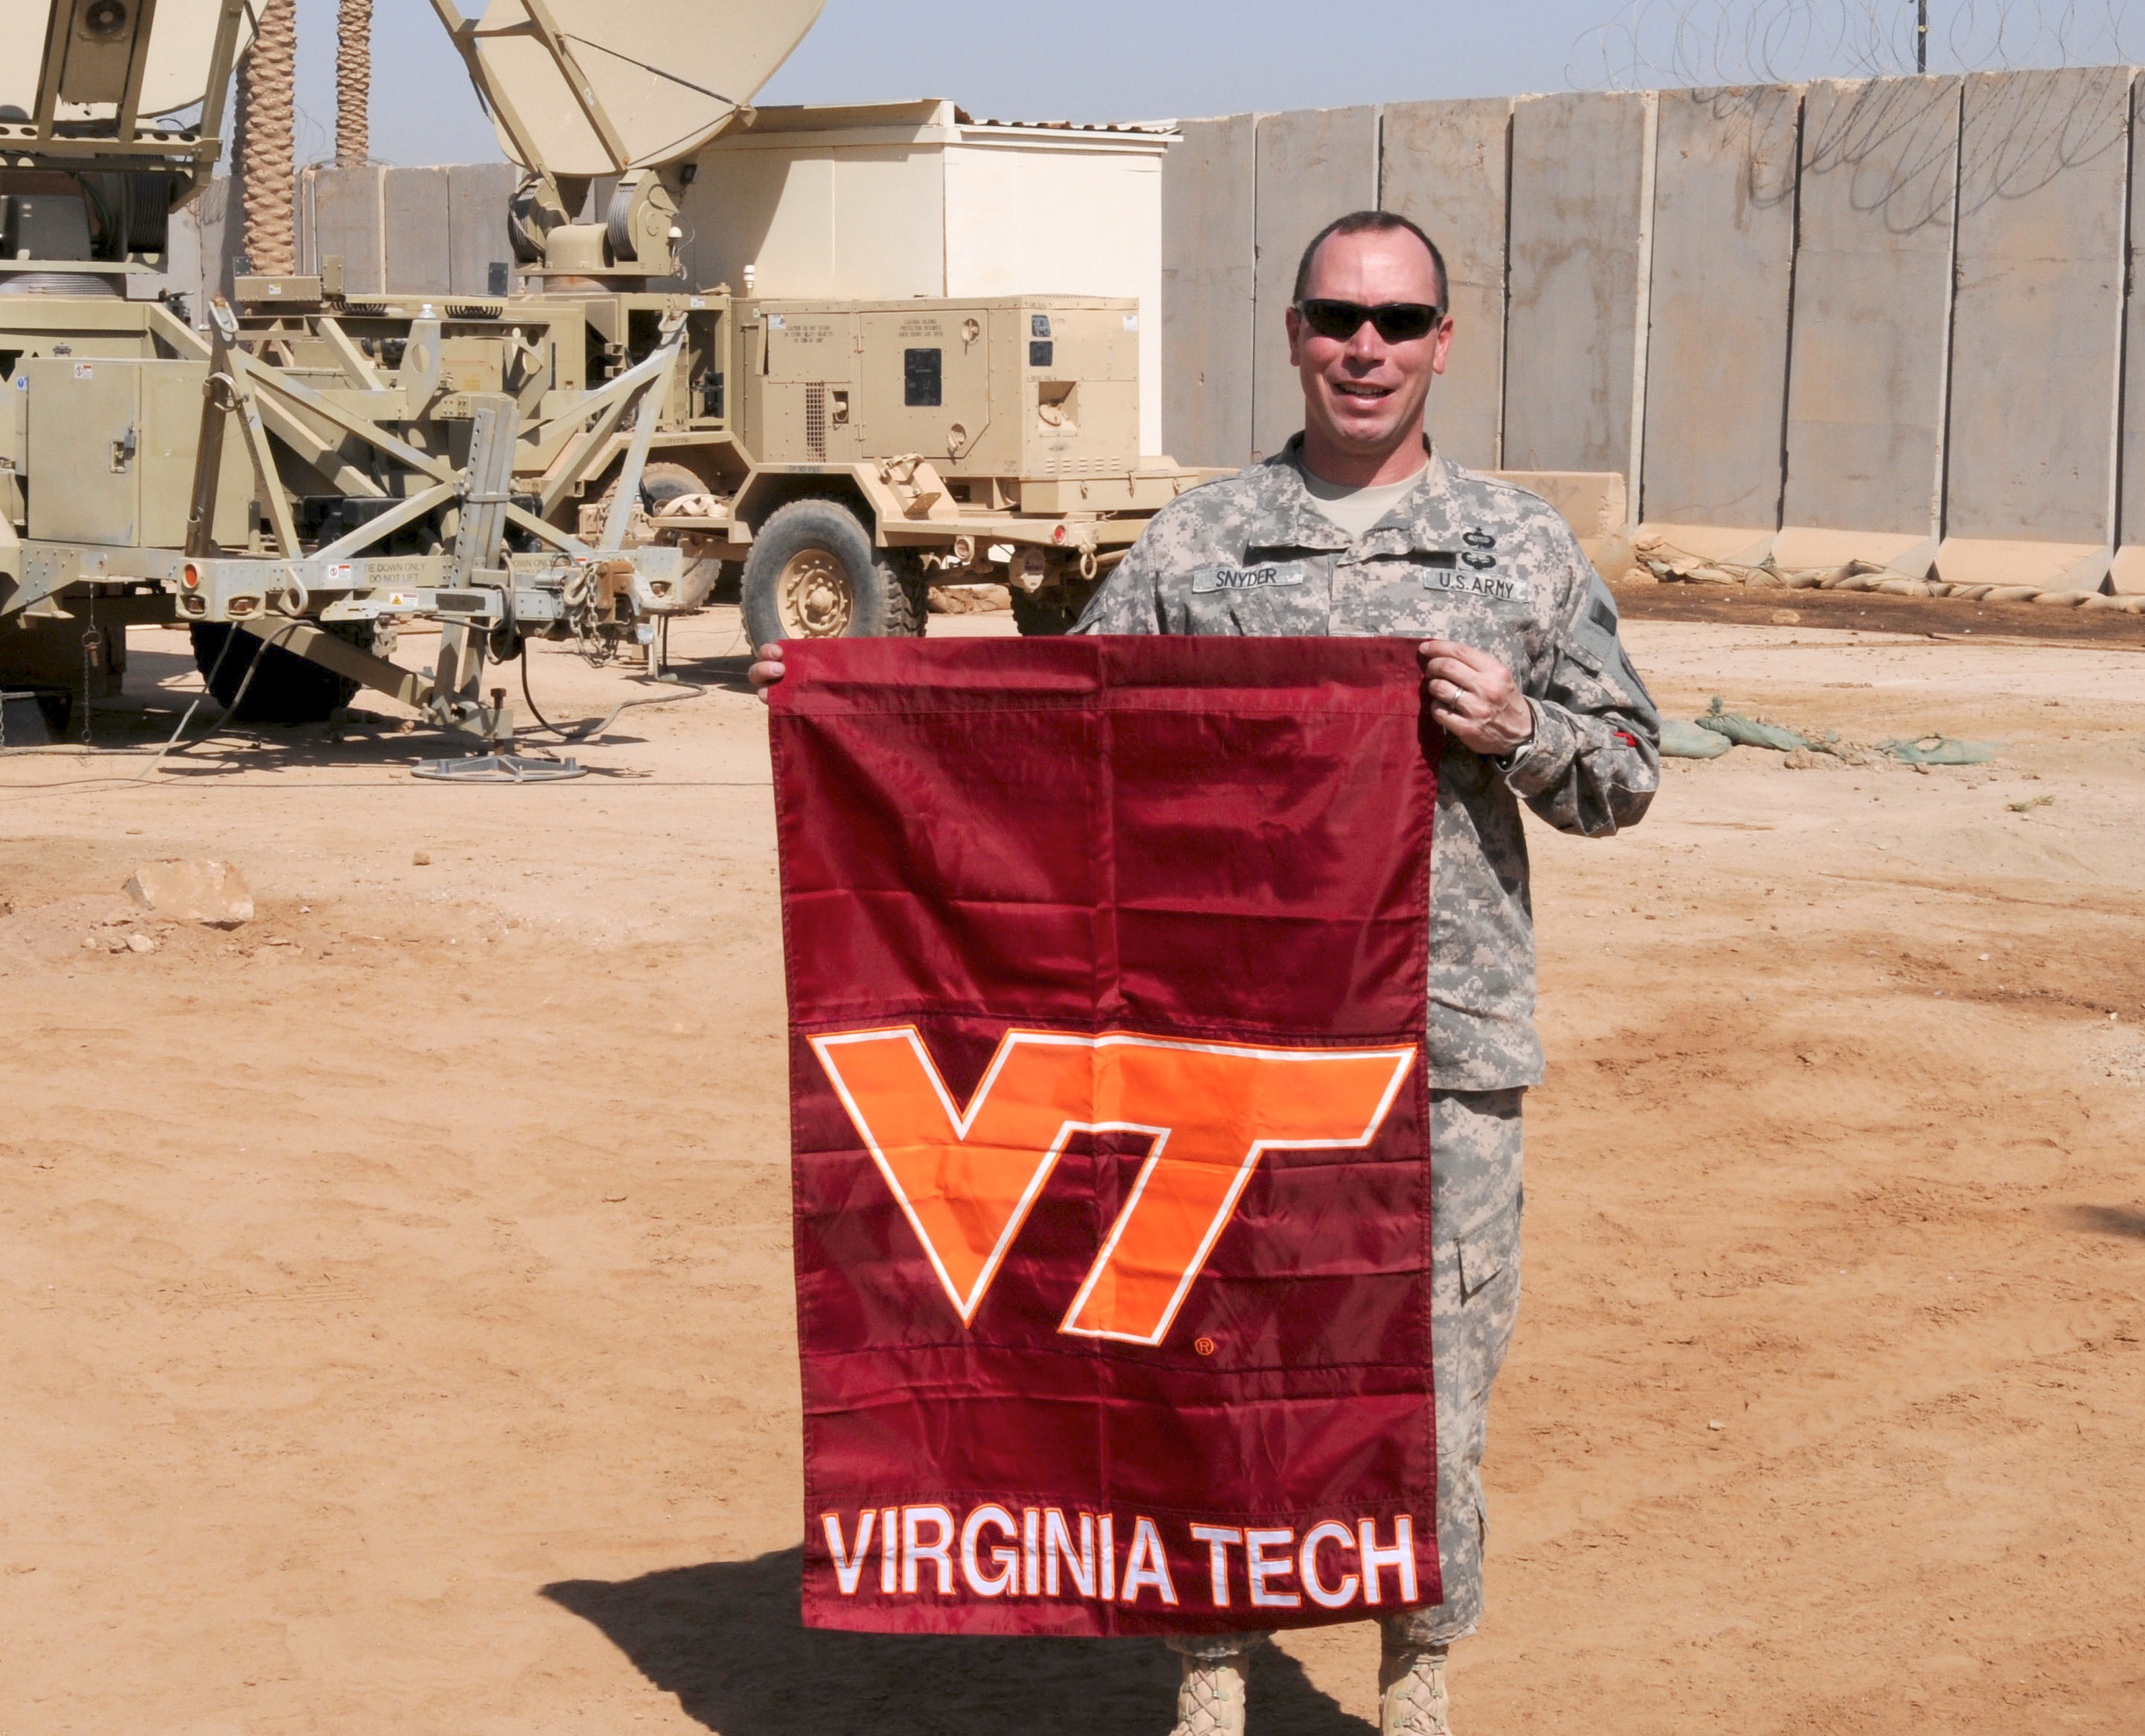 Maj. Josh Snyder, U.S. Army, Virginia Tech Corps of Cadets Class of 1998 shown from his deployed location in Iraq.